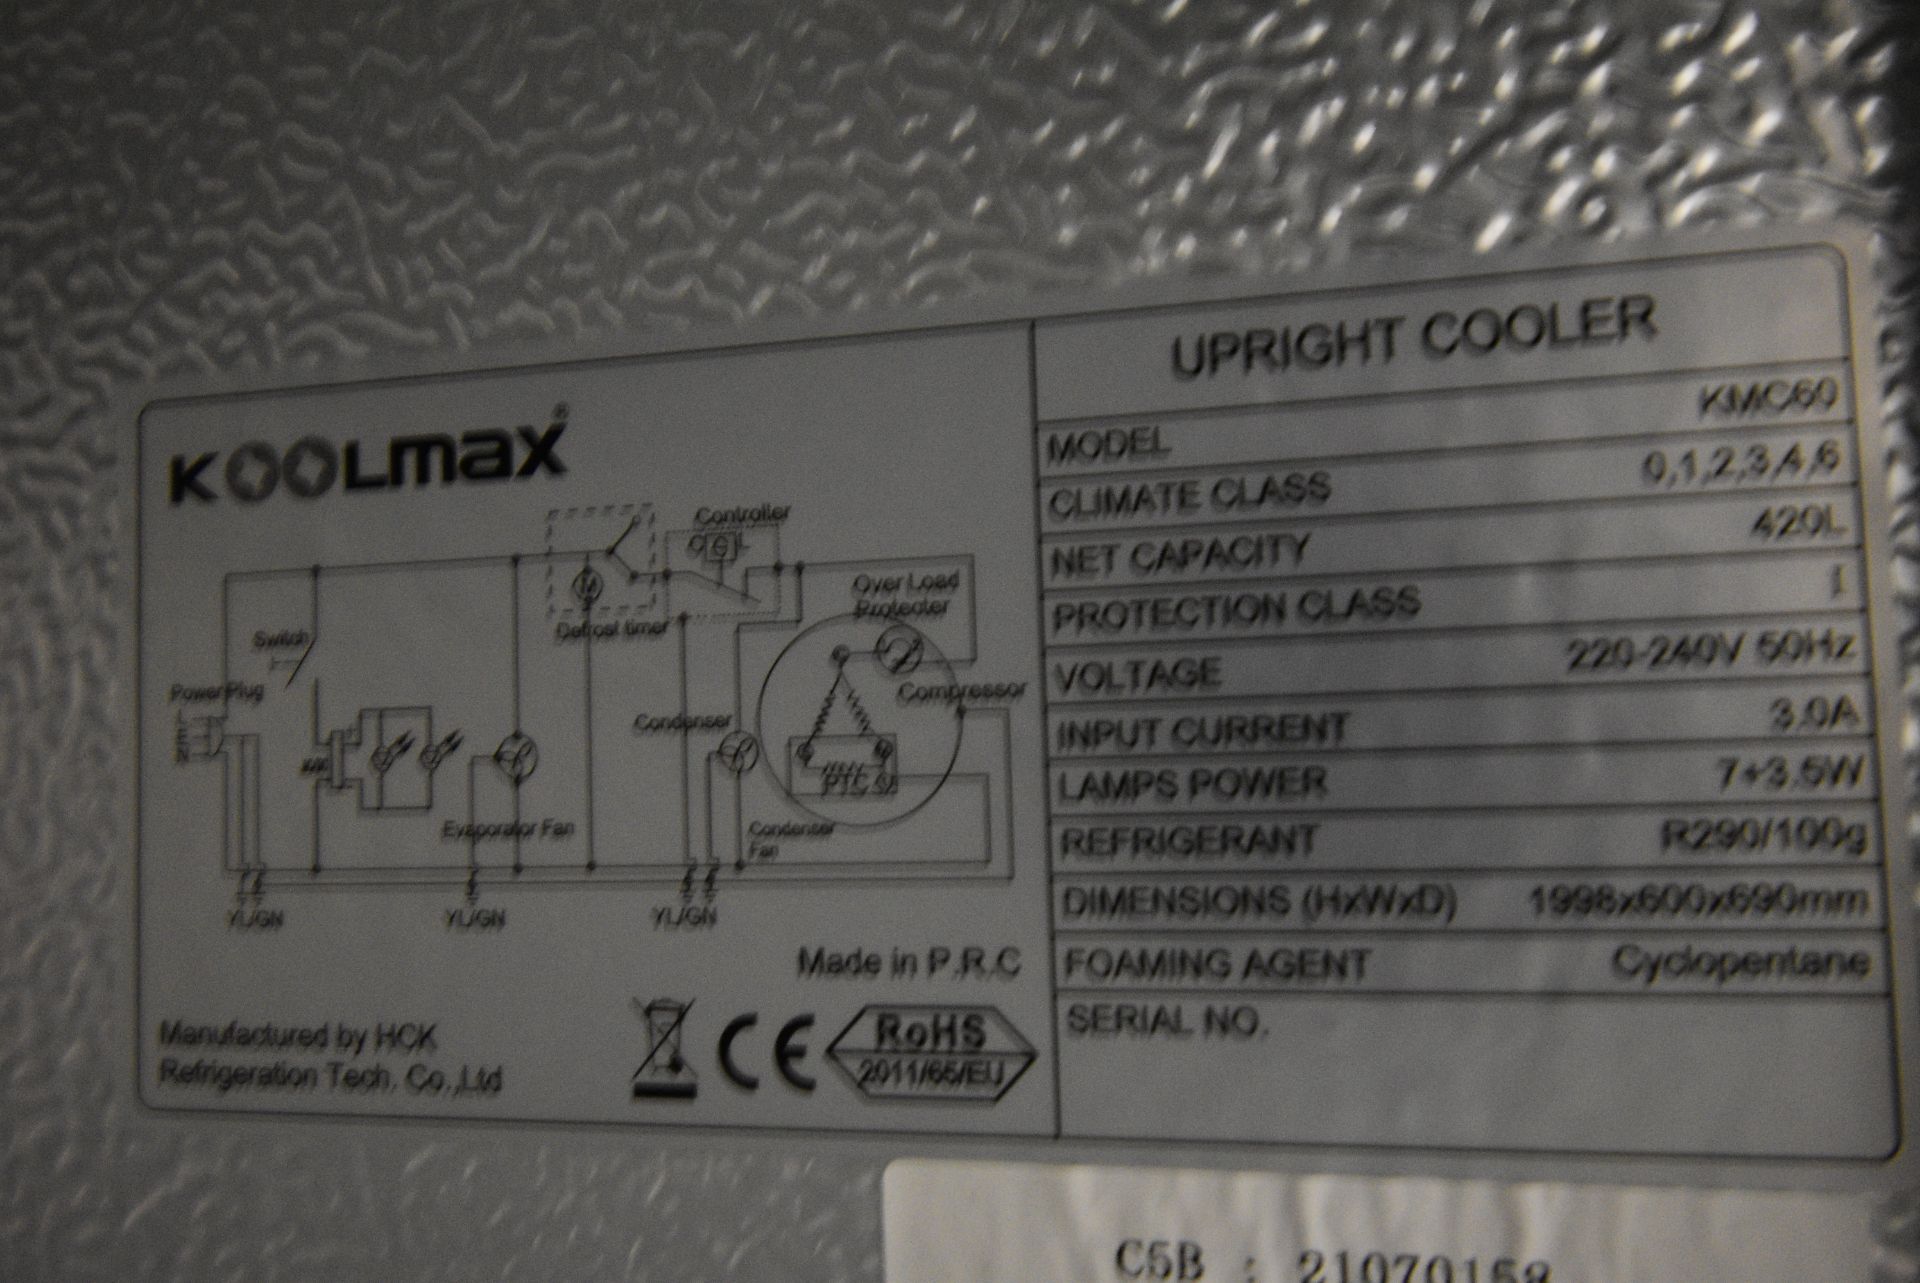 *Cool Max KNC60 Upright Cooler - Image 3 of 3